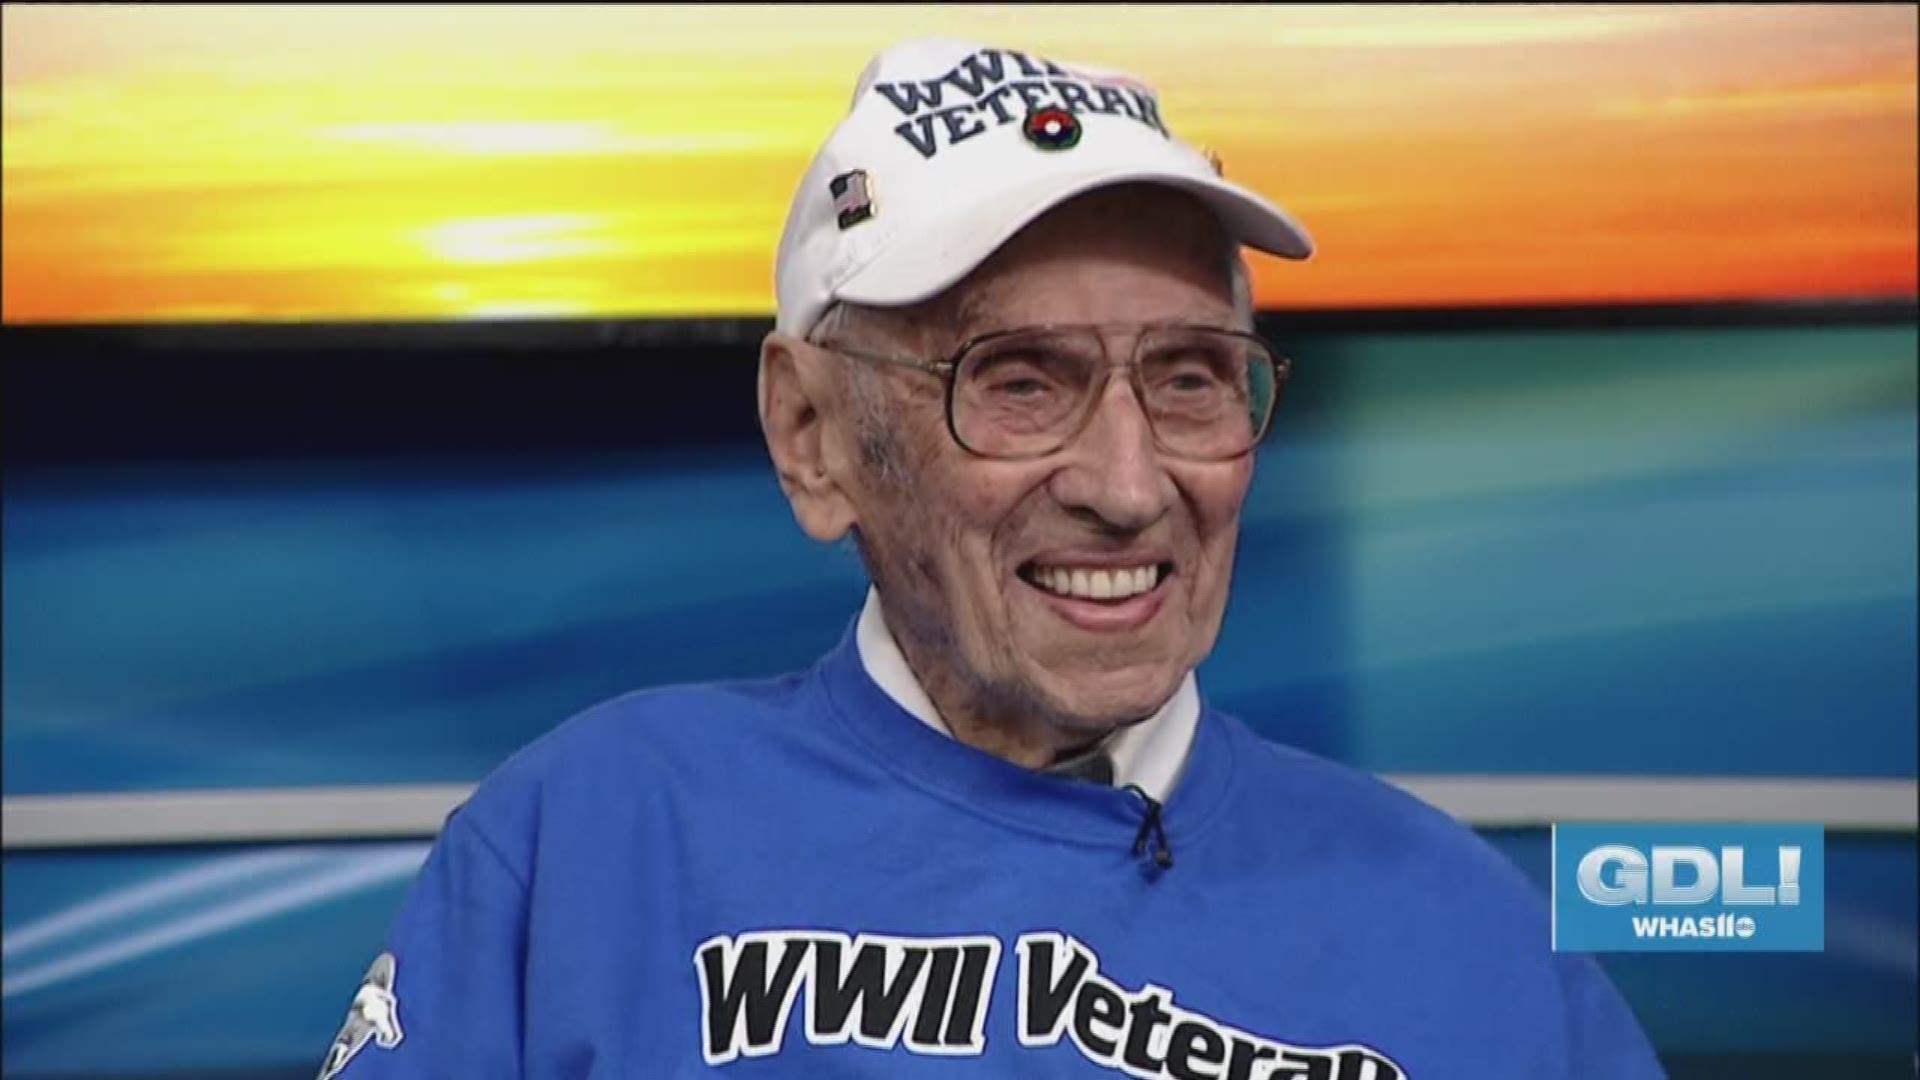 Ernie Micka is a World War II veteran who is involved with Honor Flight Bluegrass. He stopped by Great Day Live to celebrate his 101st birthday.